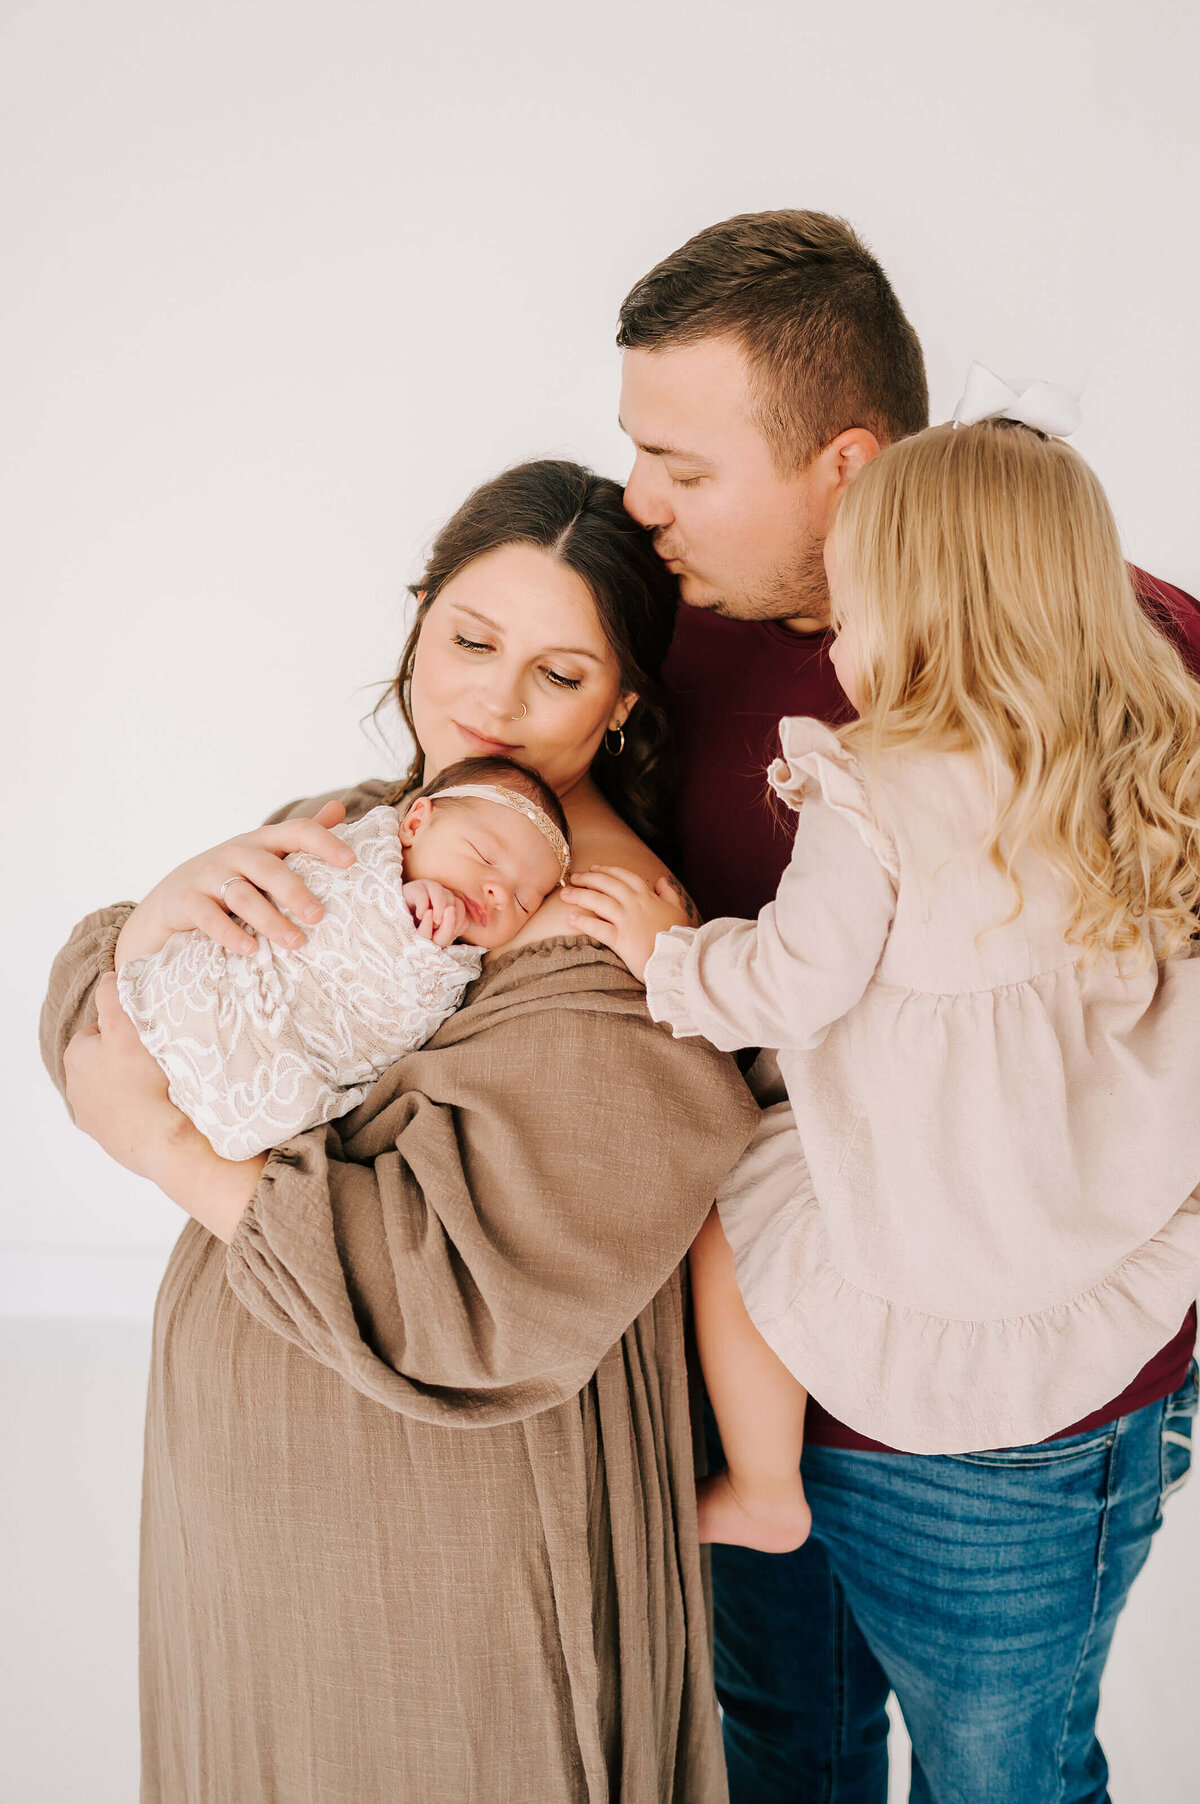 Springfield MO newborn photography of family of 4 cuddling and kissing holding newborn